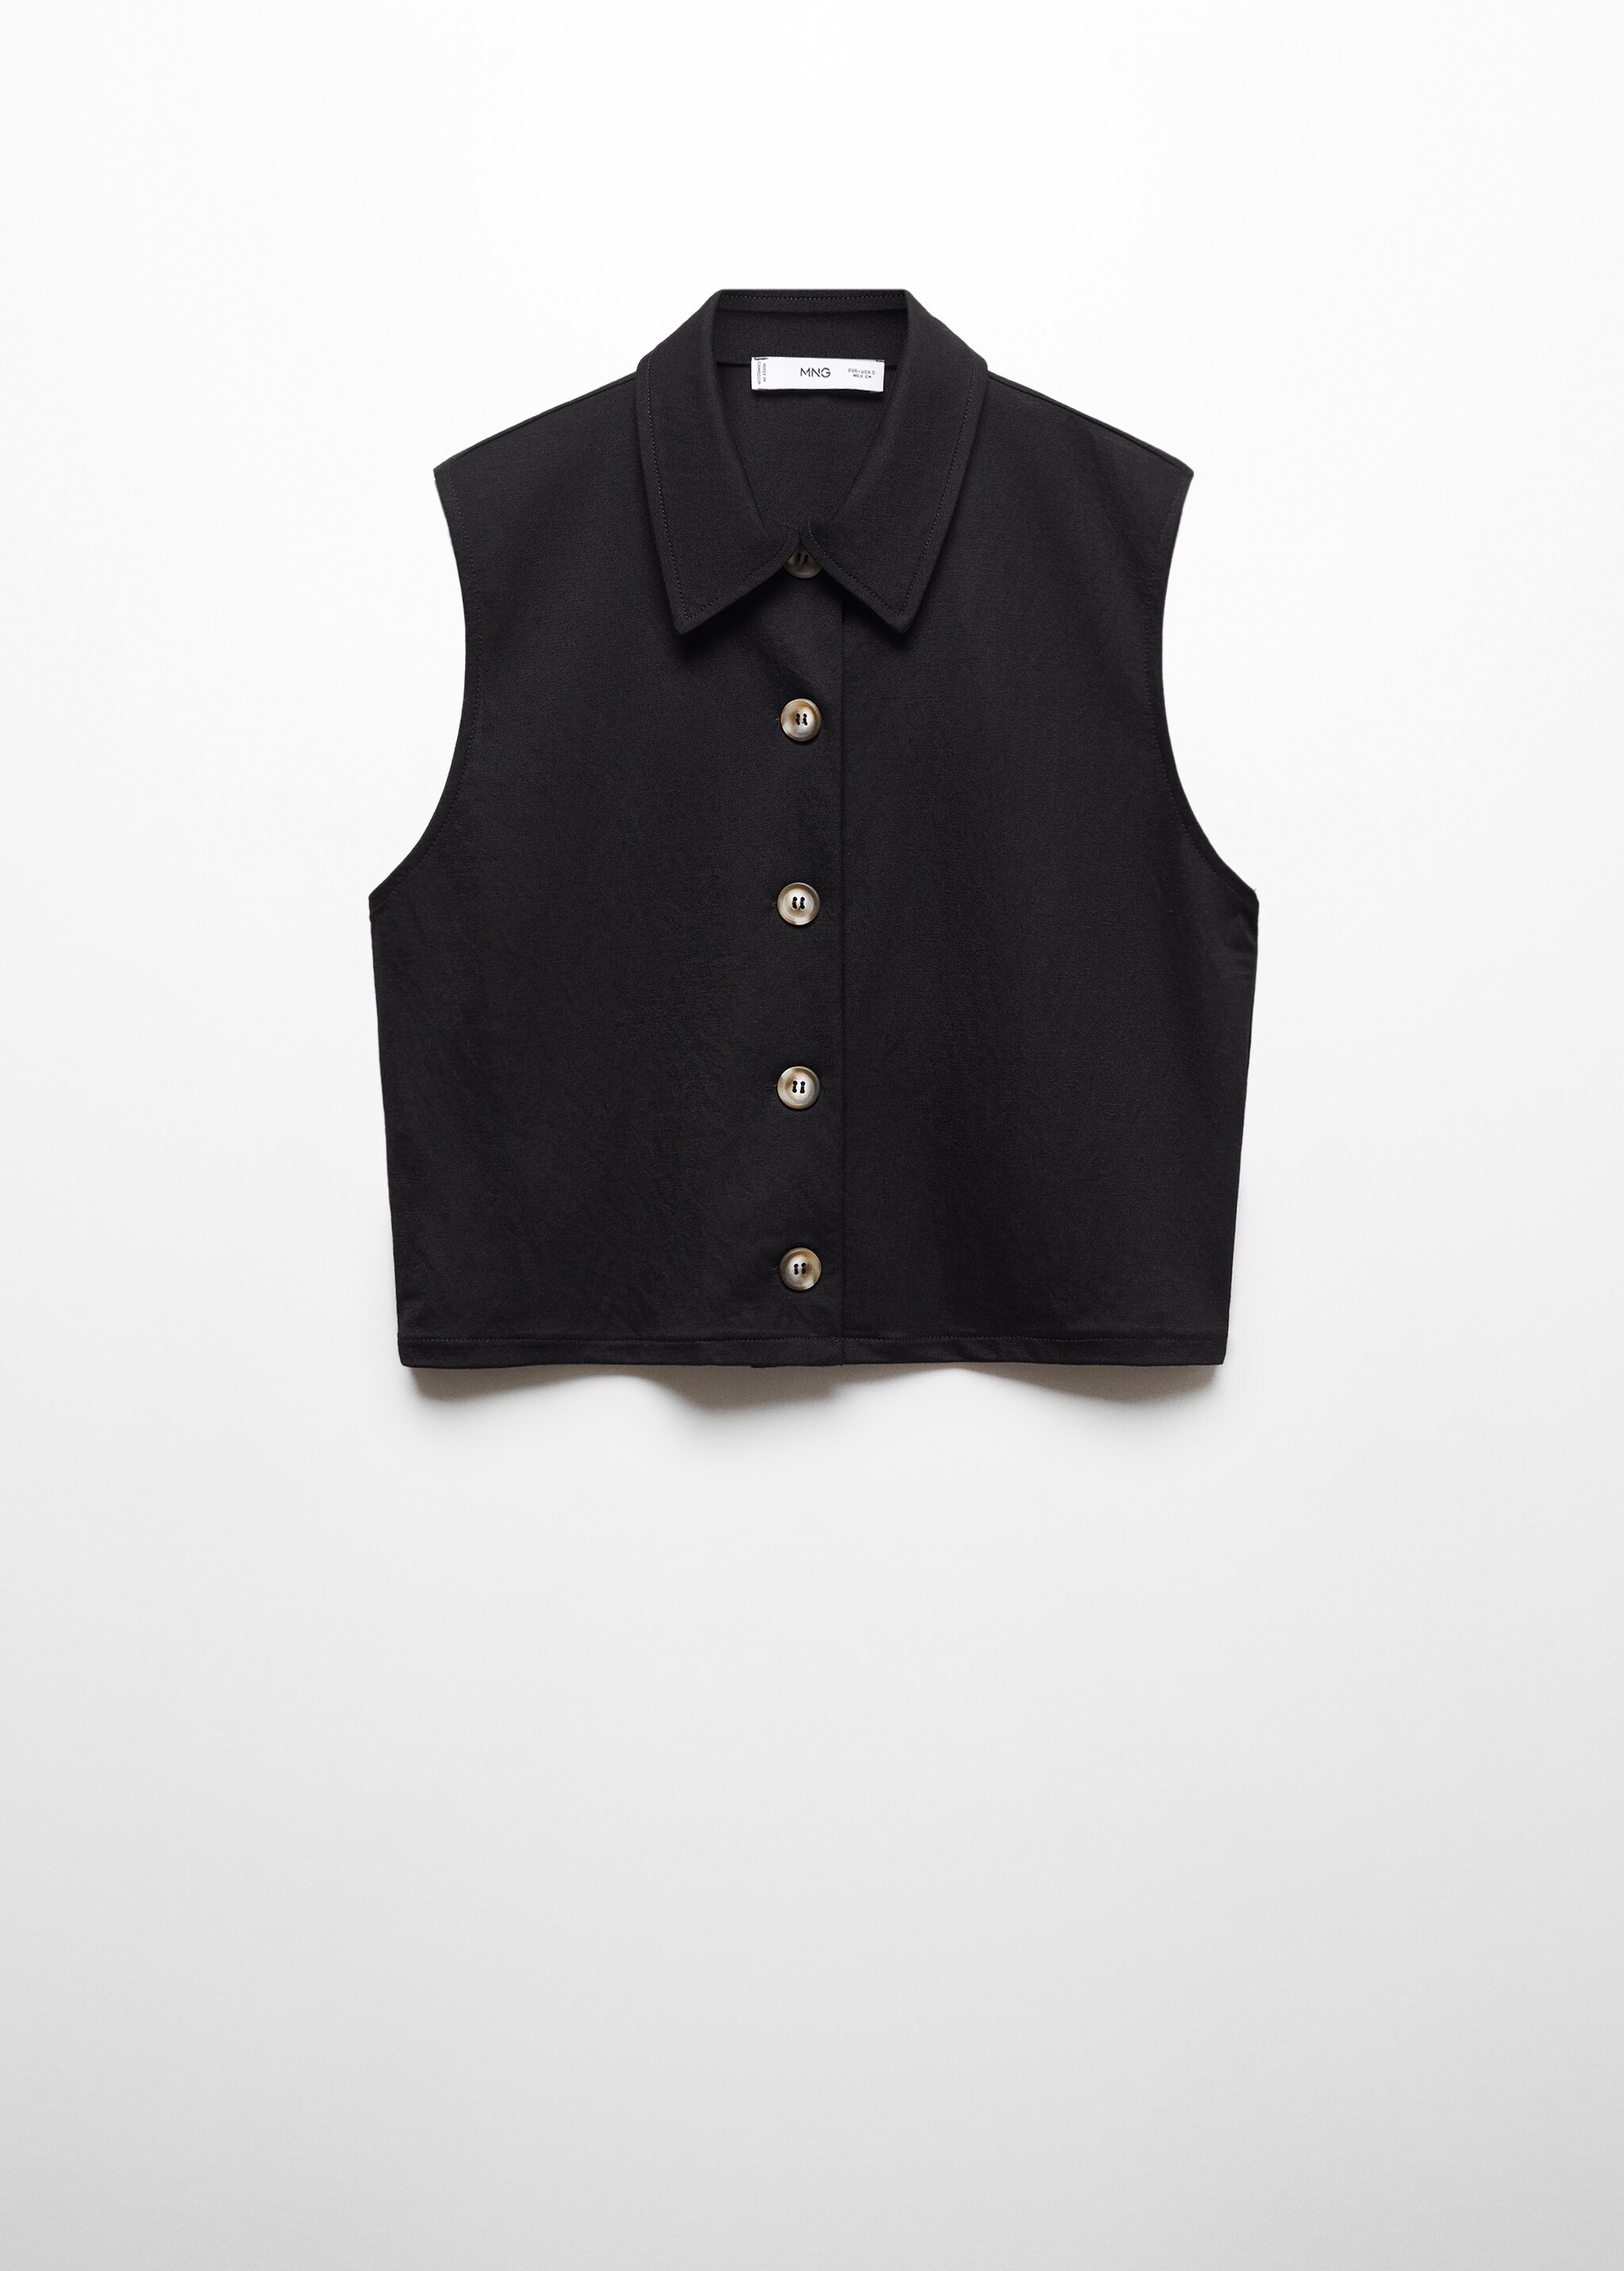 Shirt collar waistcoat - Article without model